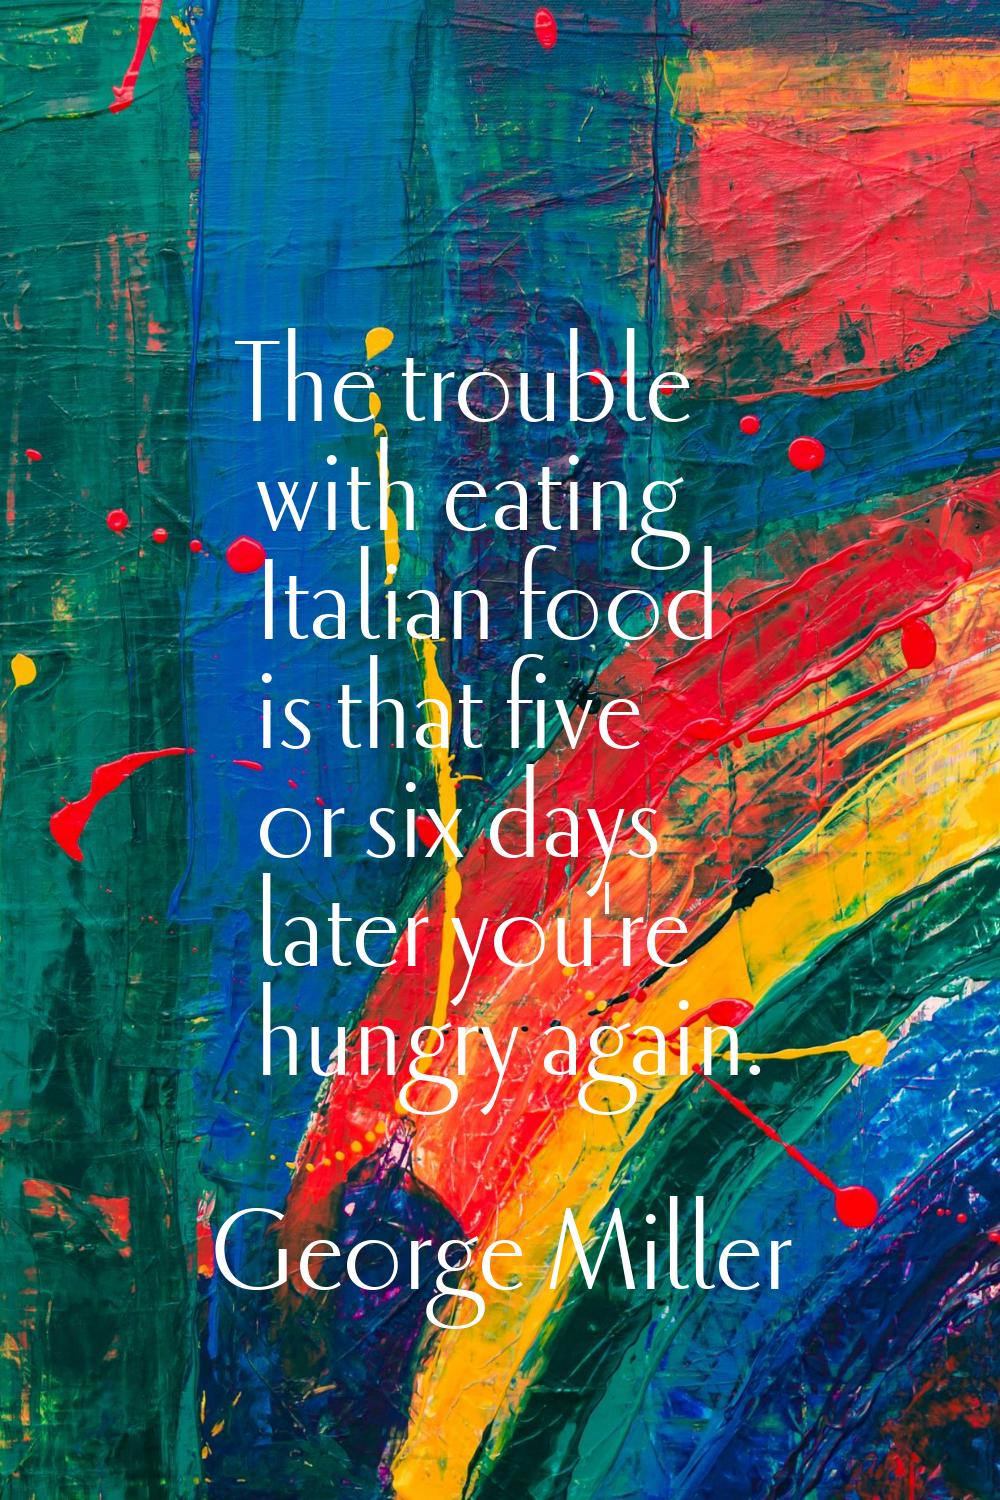 The trouble with eating Italian food is that five or six days later you're hungry again.